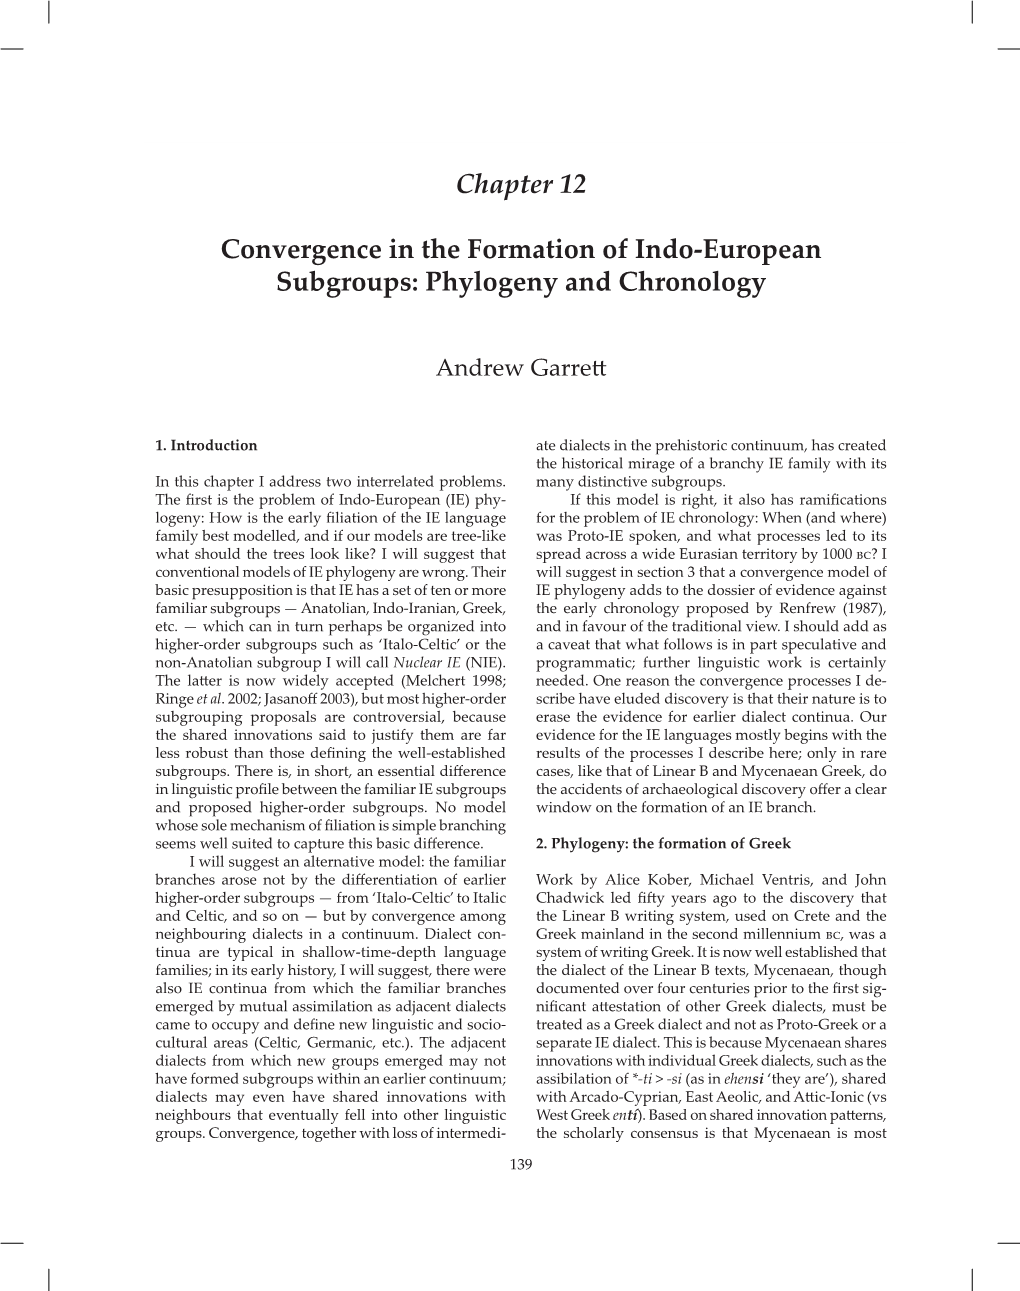 Convergence in the Formation of Indo‑European Subgroups